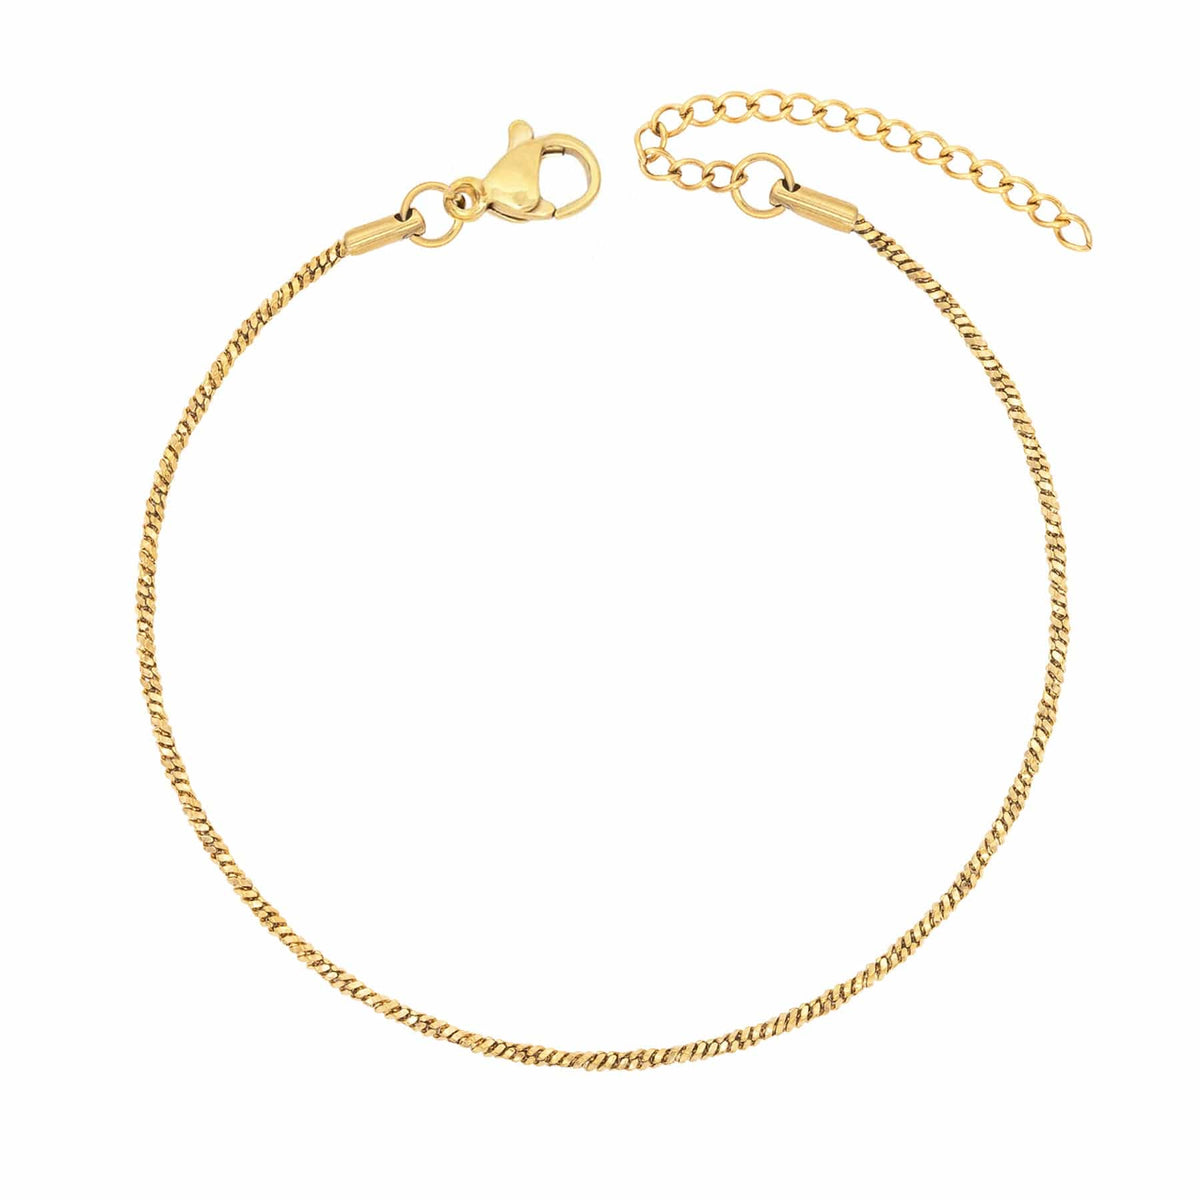 BohoMoon Stainless Steel Lyla Anklet Gold